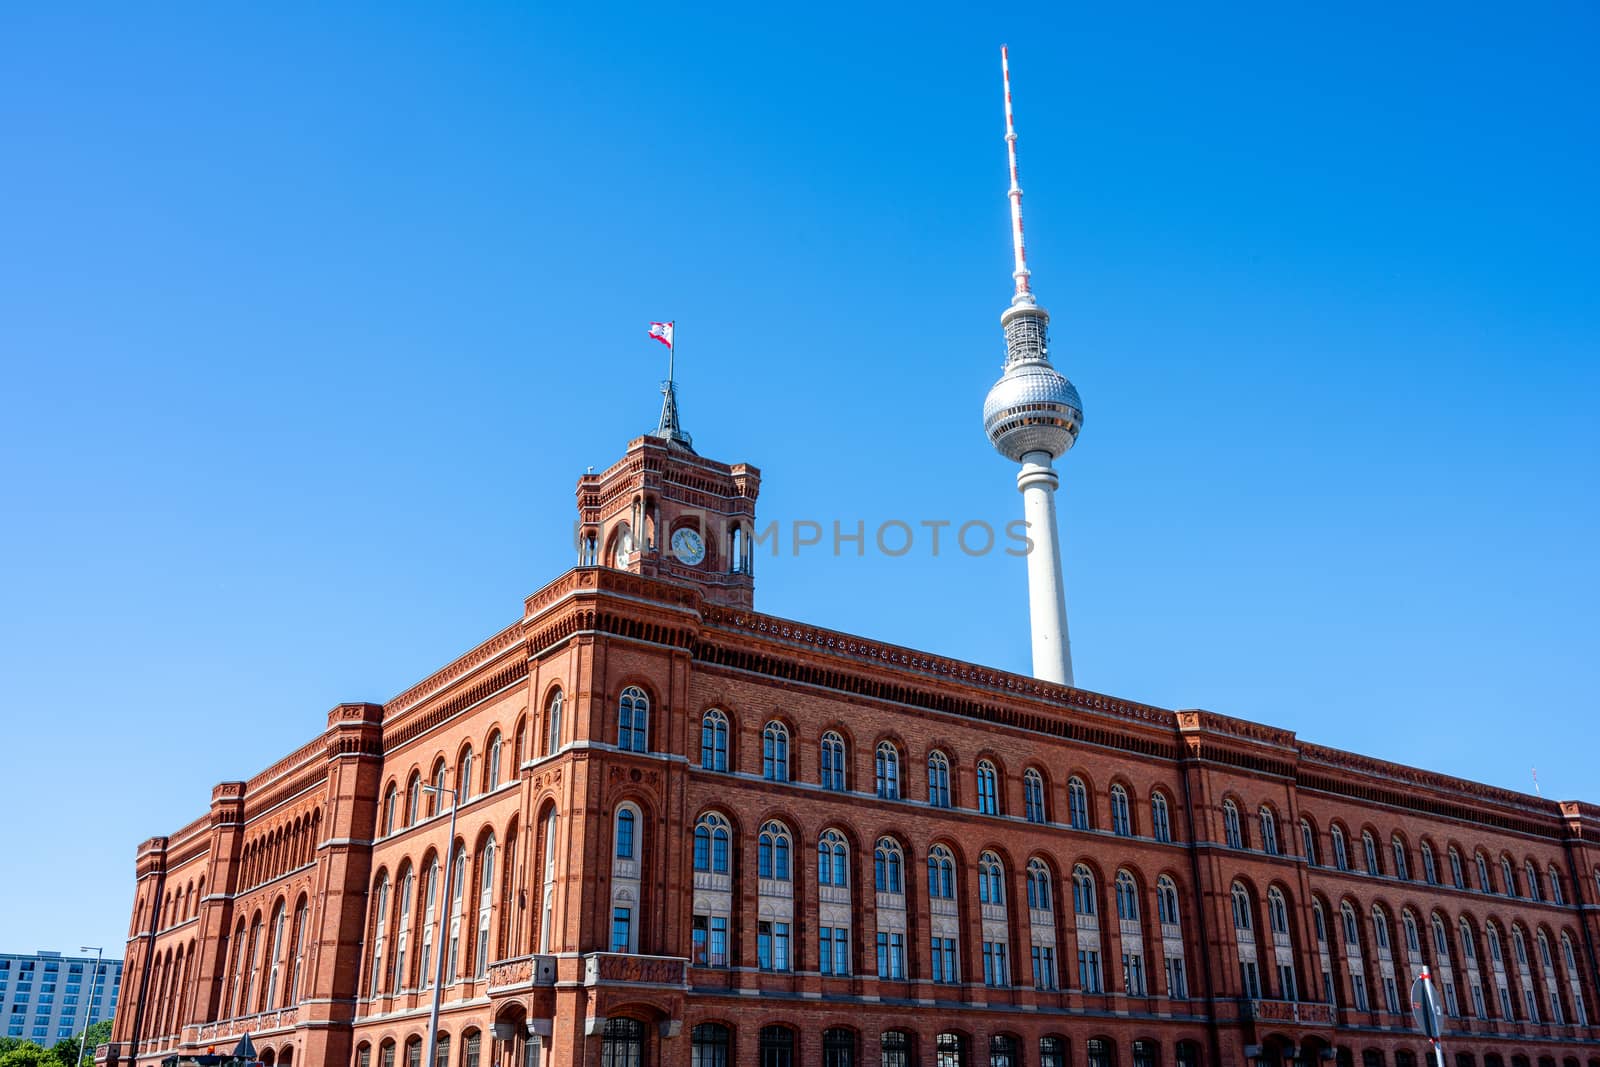 The famous Television Tower and the city hall in Berlin in front of a clear blue sky